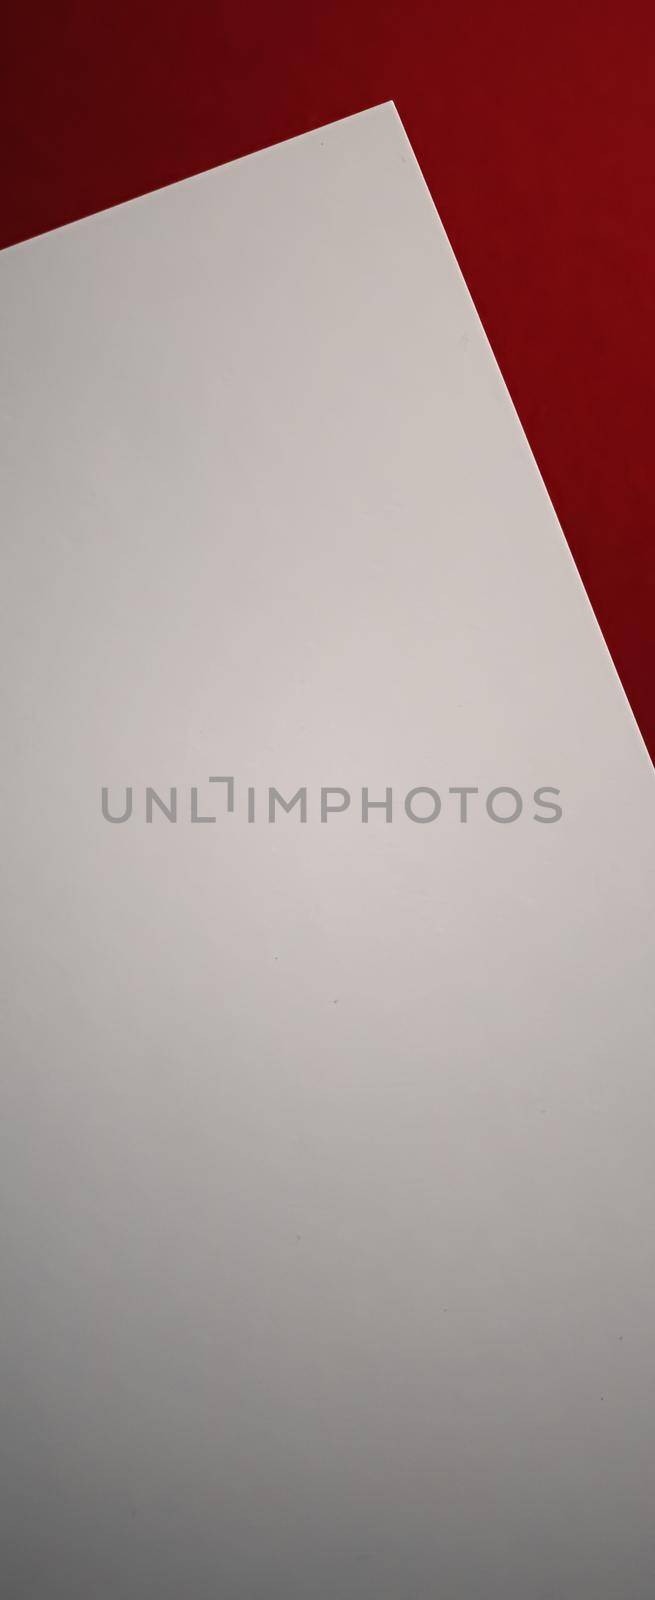 Blank A4 paper, white on red background as office stationery flatlay, luxury branding flat lay and brand identity design for mockup.